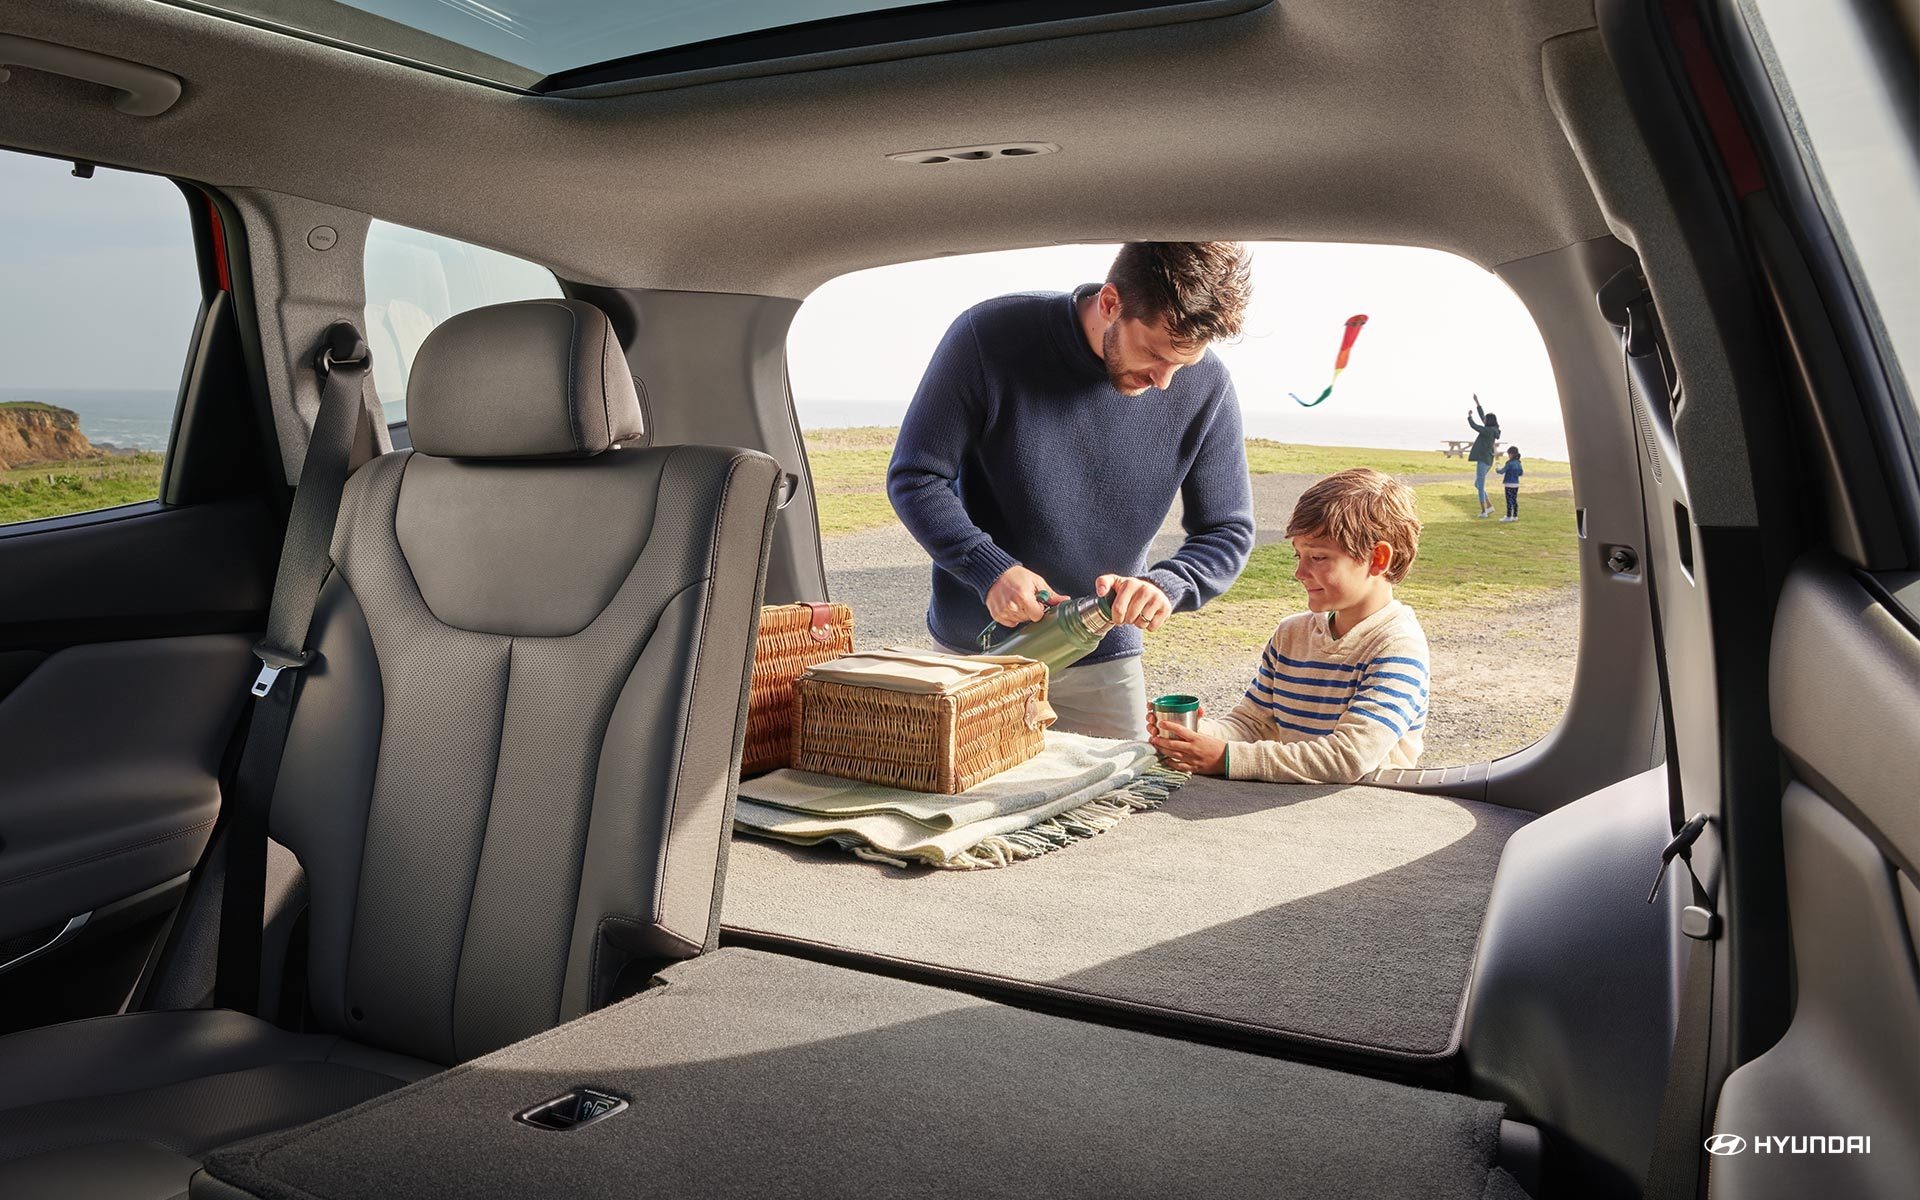 <p>The 2019 Hyundai Santa Fe will be even more loved by families</p>